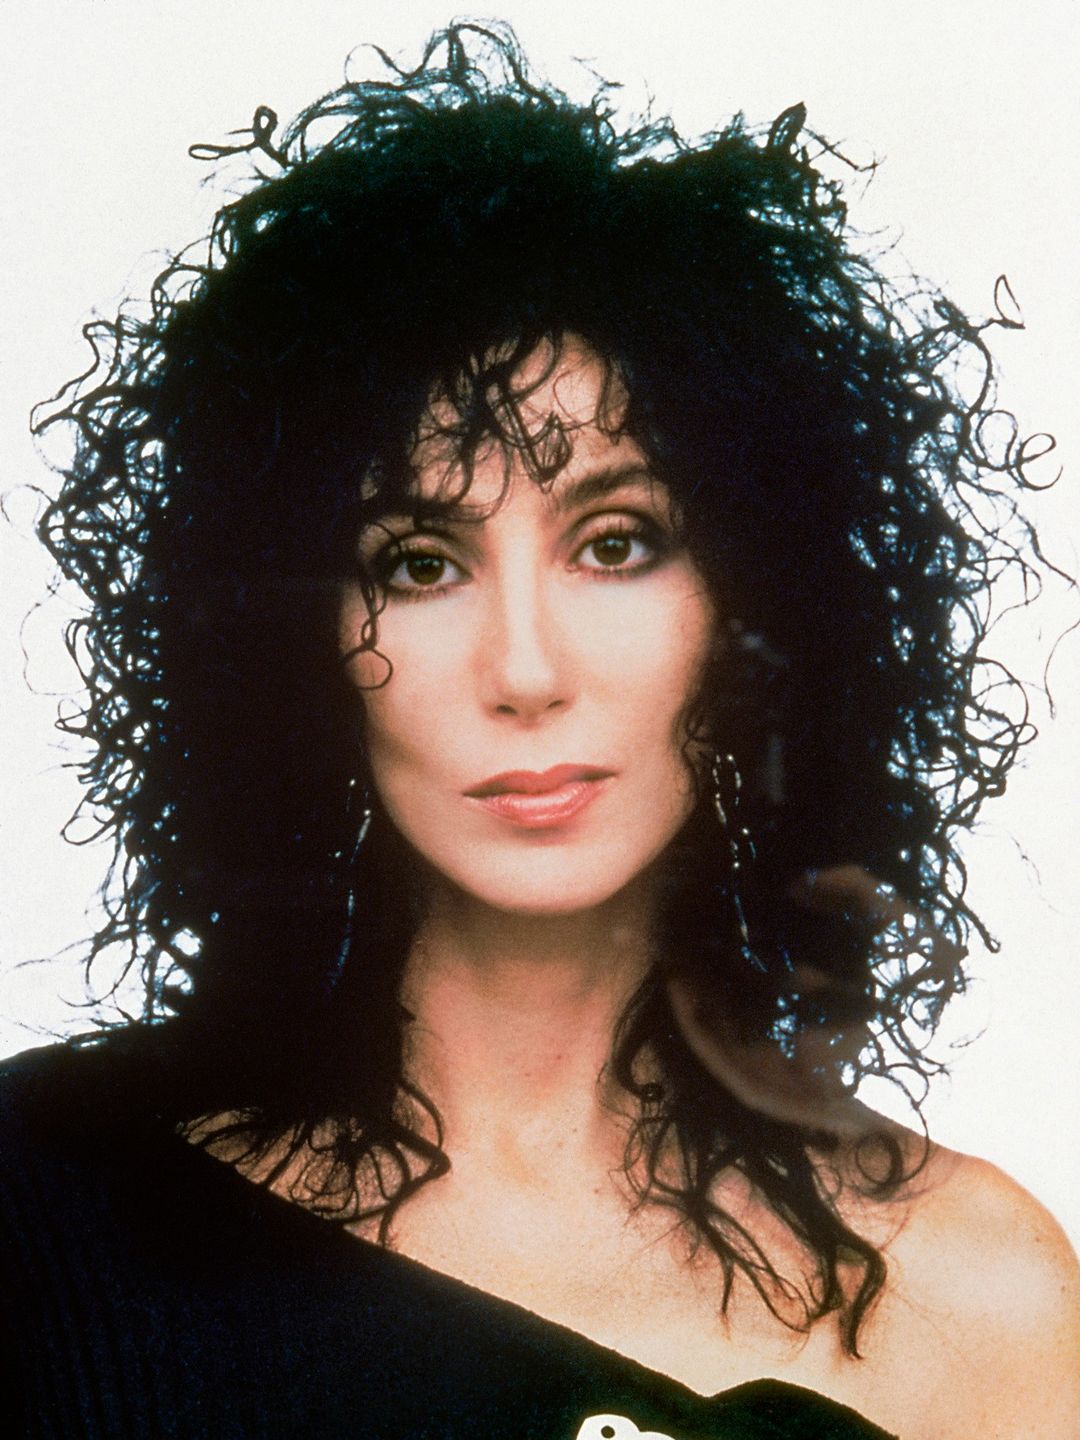 Cher early career